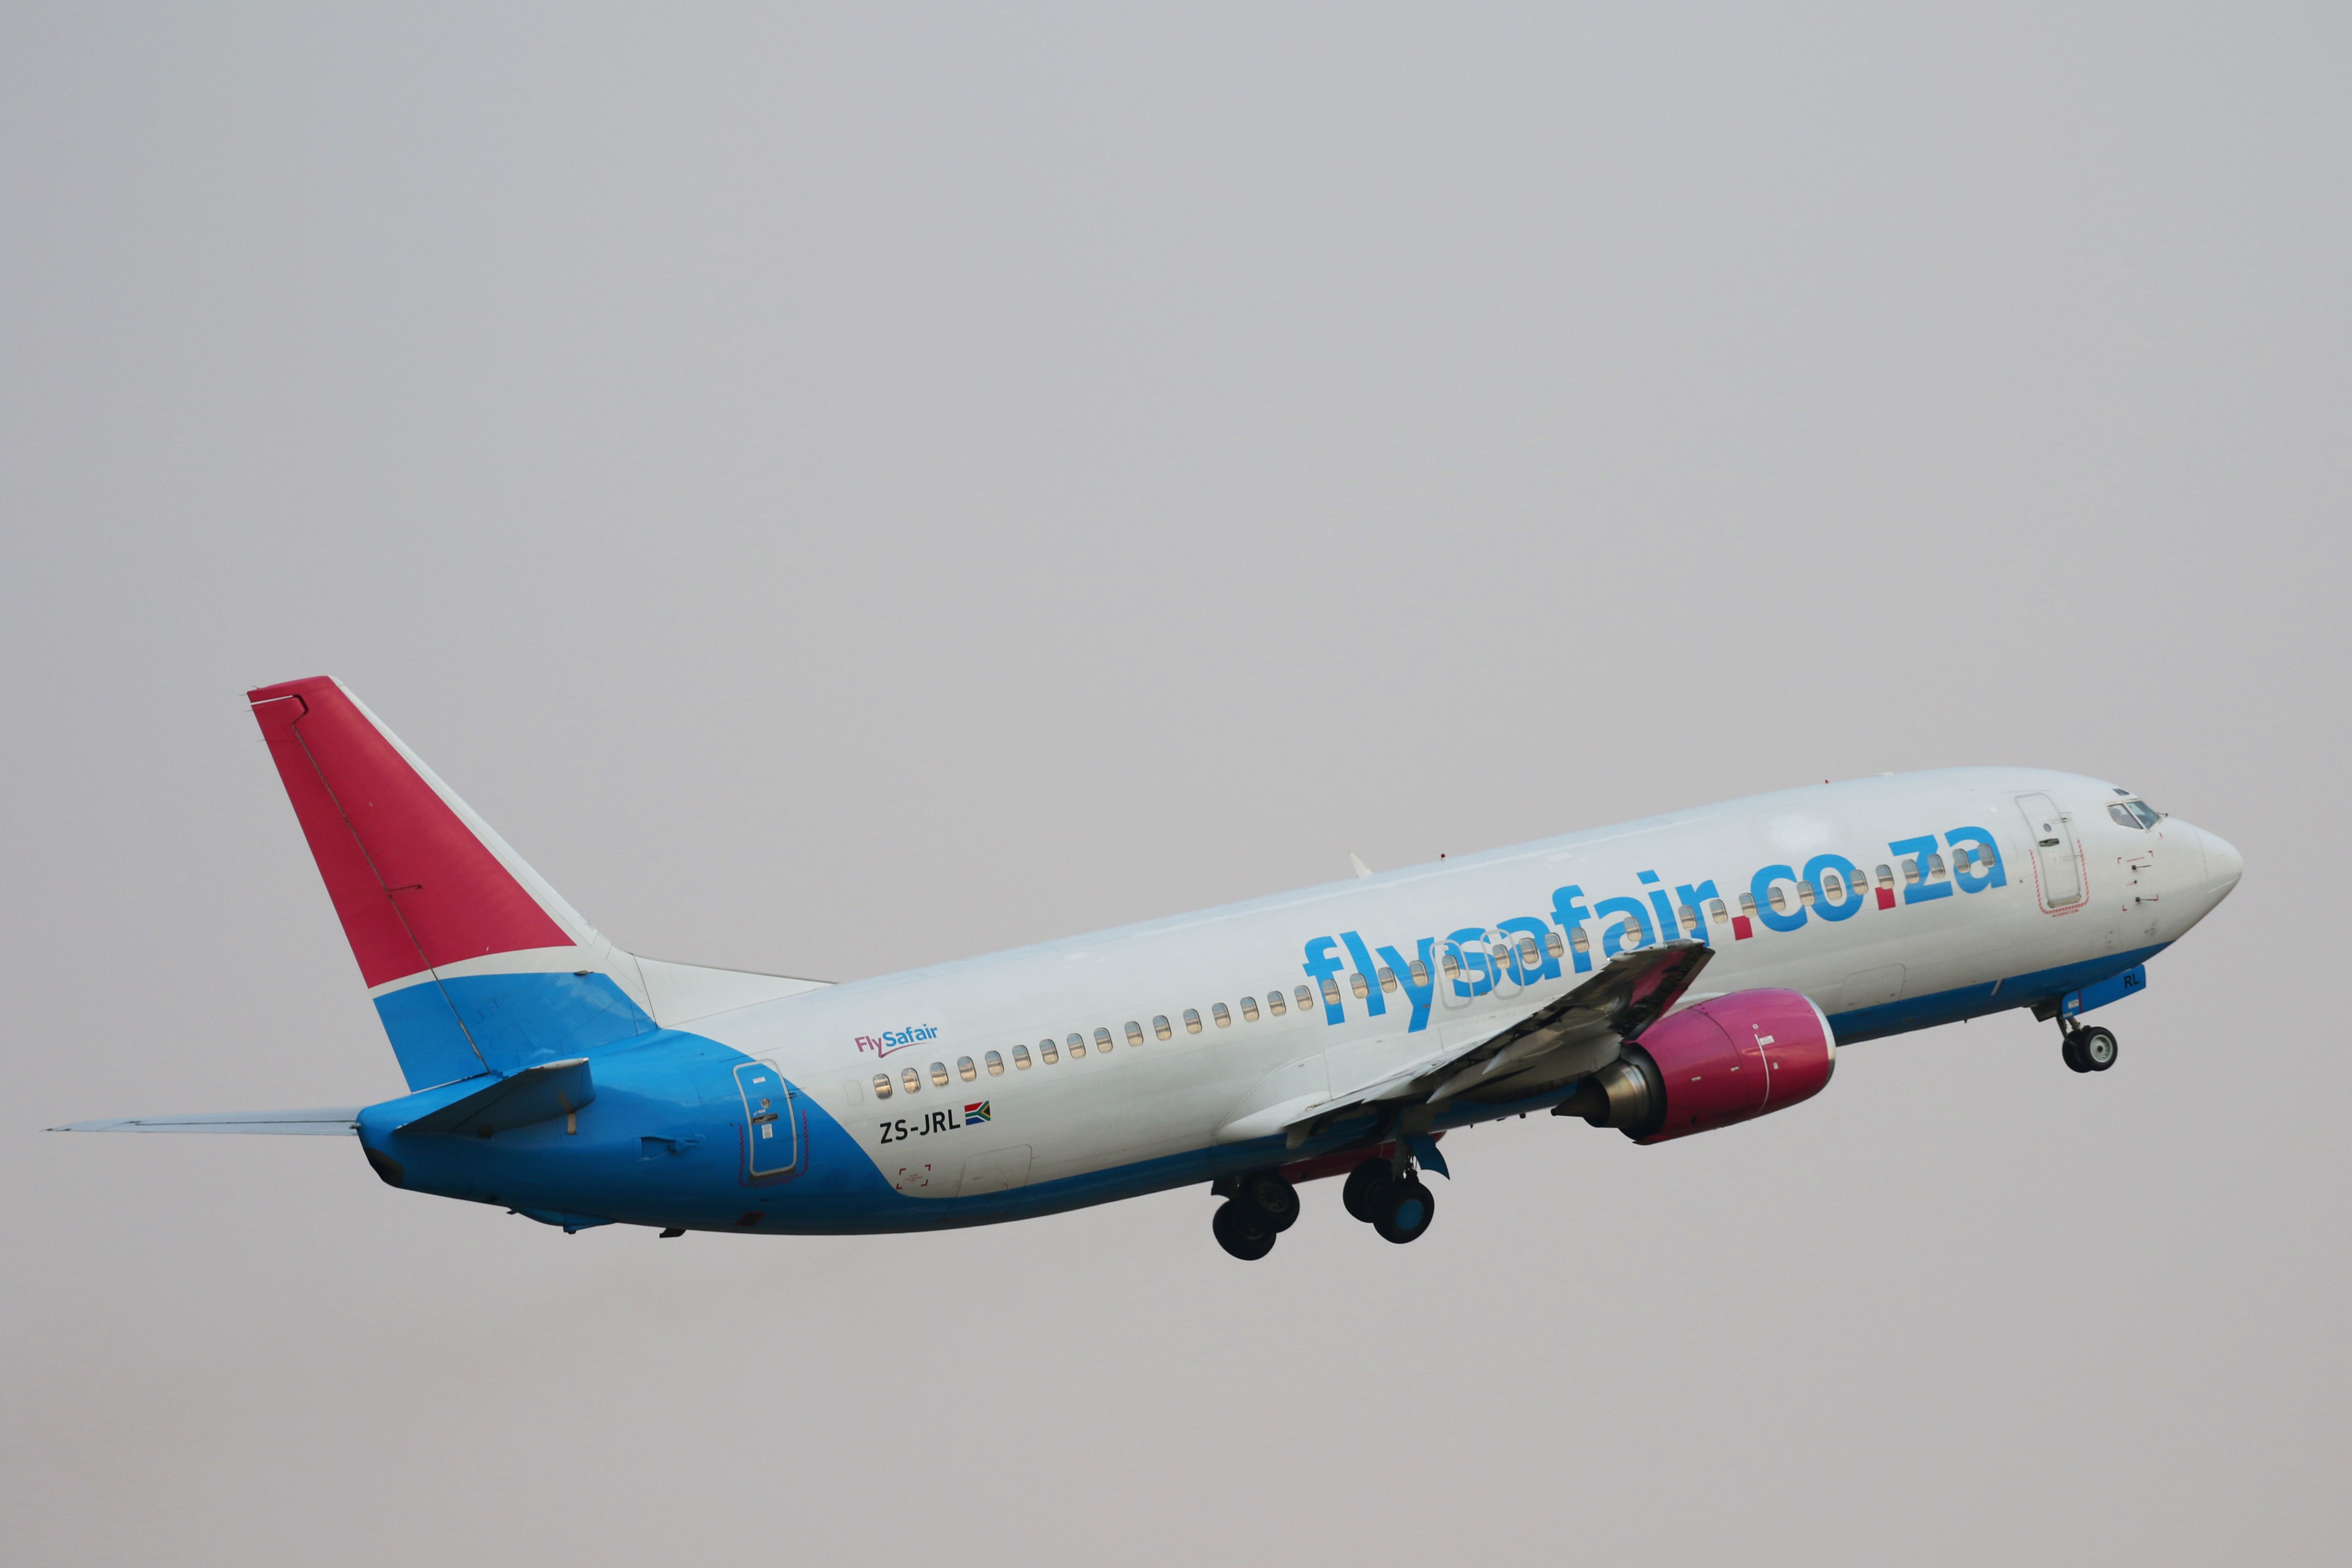 A Flysafair aircraft flying in the sky.